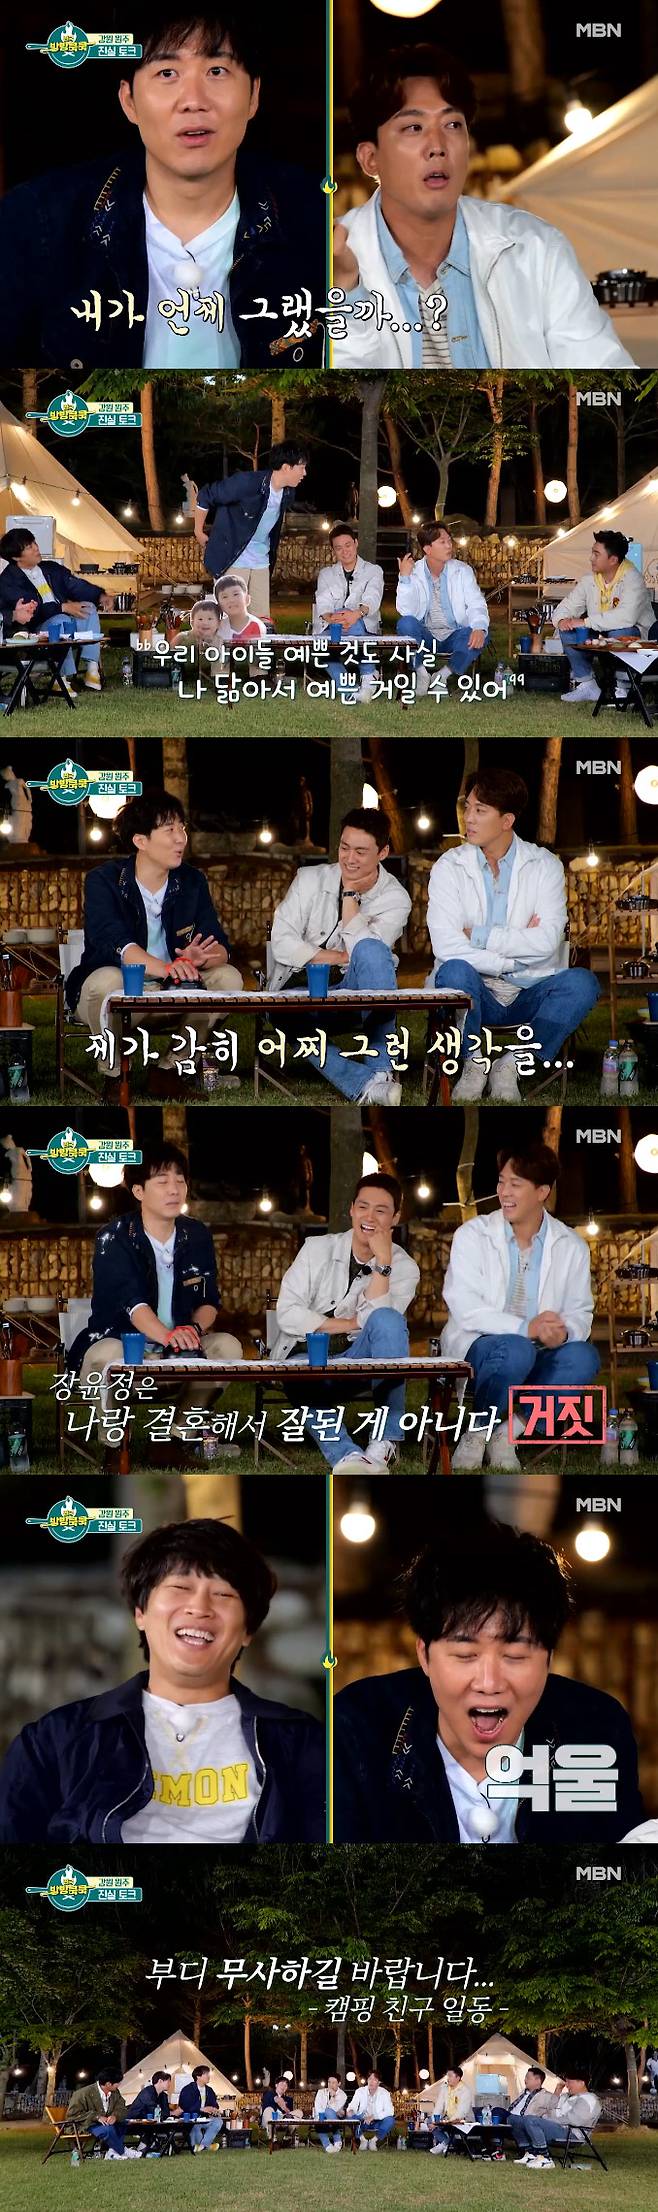 MBN All States Room Cook broadcast on the 19th, the members talked about food that can catch the atmosphere with the wife.Do Kyoung-wan, Oh Sang-jin and Kim Hwan, who appeared as Camping friends on the day, showed a pleasant and honest conversation and heightened the camping atmosphere.In the truth talk corner, Kim Hwan said, I have been drinking with Do Kyoung-wan. I do not know if Do Kyoung-wan was drunk and said that, but I think I was serious.Do Kyoung-wan said, Honestly, Jang Yun-jeong married me, did not it work out?Kim Hwan stopped Do Kyoung-wan, who was surprised and jumped to his seat, saying, But I have never said this.And My children are pretty, too, and I can be pretty because I am actually like me.Do Kyoung-wan said, When did I do it?But the polygraph results were different.Jang Yun-jeong would have kept this much even if he had not married me, he said, but it turned out to be false and laughed.Also, Do Kyoung-wan was falsely judged in the question about Jun Hyun-moo.Asked by Cha Tae-hyun, If you are in this momentum, you can beat Jun Hyun-moo in three years, he said, No.I am a genius who tries to see my brother, but this was a lie. Do Kyoung-wan said, It is not three years but one year.Next, Cha Tae-hyun reported that Kim Hwan played a sad ballad when he took her to the airport when she was a flight attendant, and a dance song when she came home.Kim Hwan said, I was going to express my sadness because I was sorry to go to work.I have been so excited and singing after my wifes business trip because of a contact accident, he said.However, Do Kyoung-wan, Oh Sang-jin and Kim Hwan finished the talk warmly by revealing the aspect of their love-man husband toward his wife.